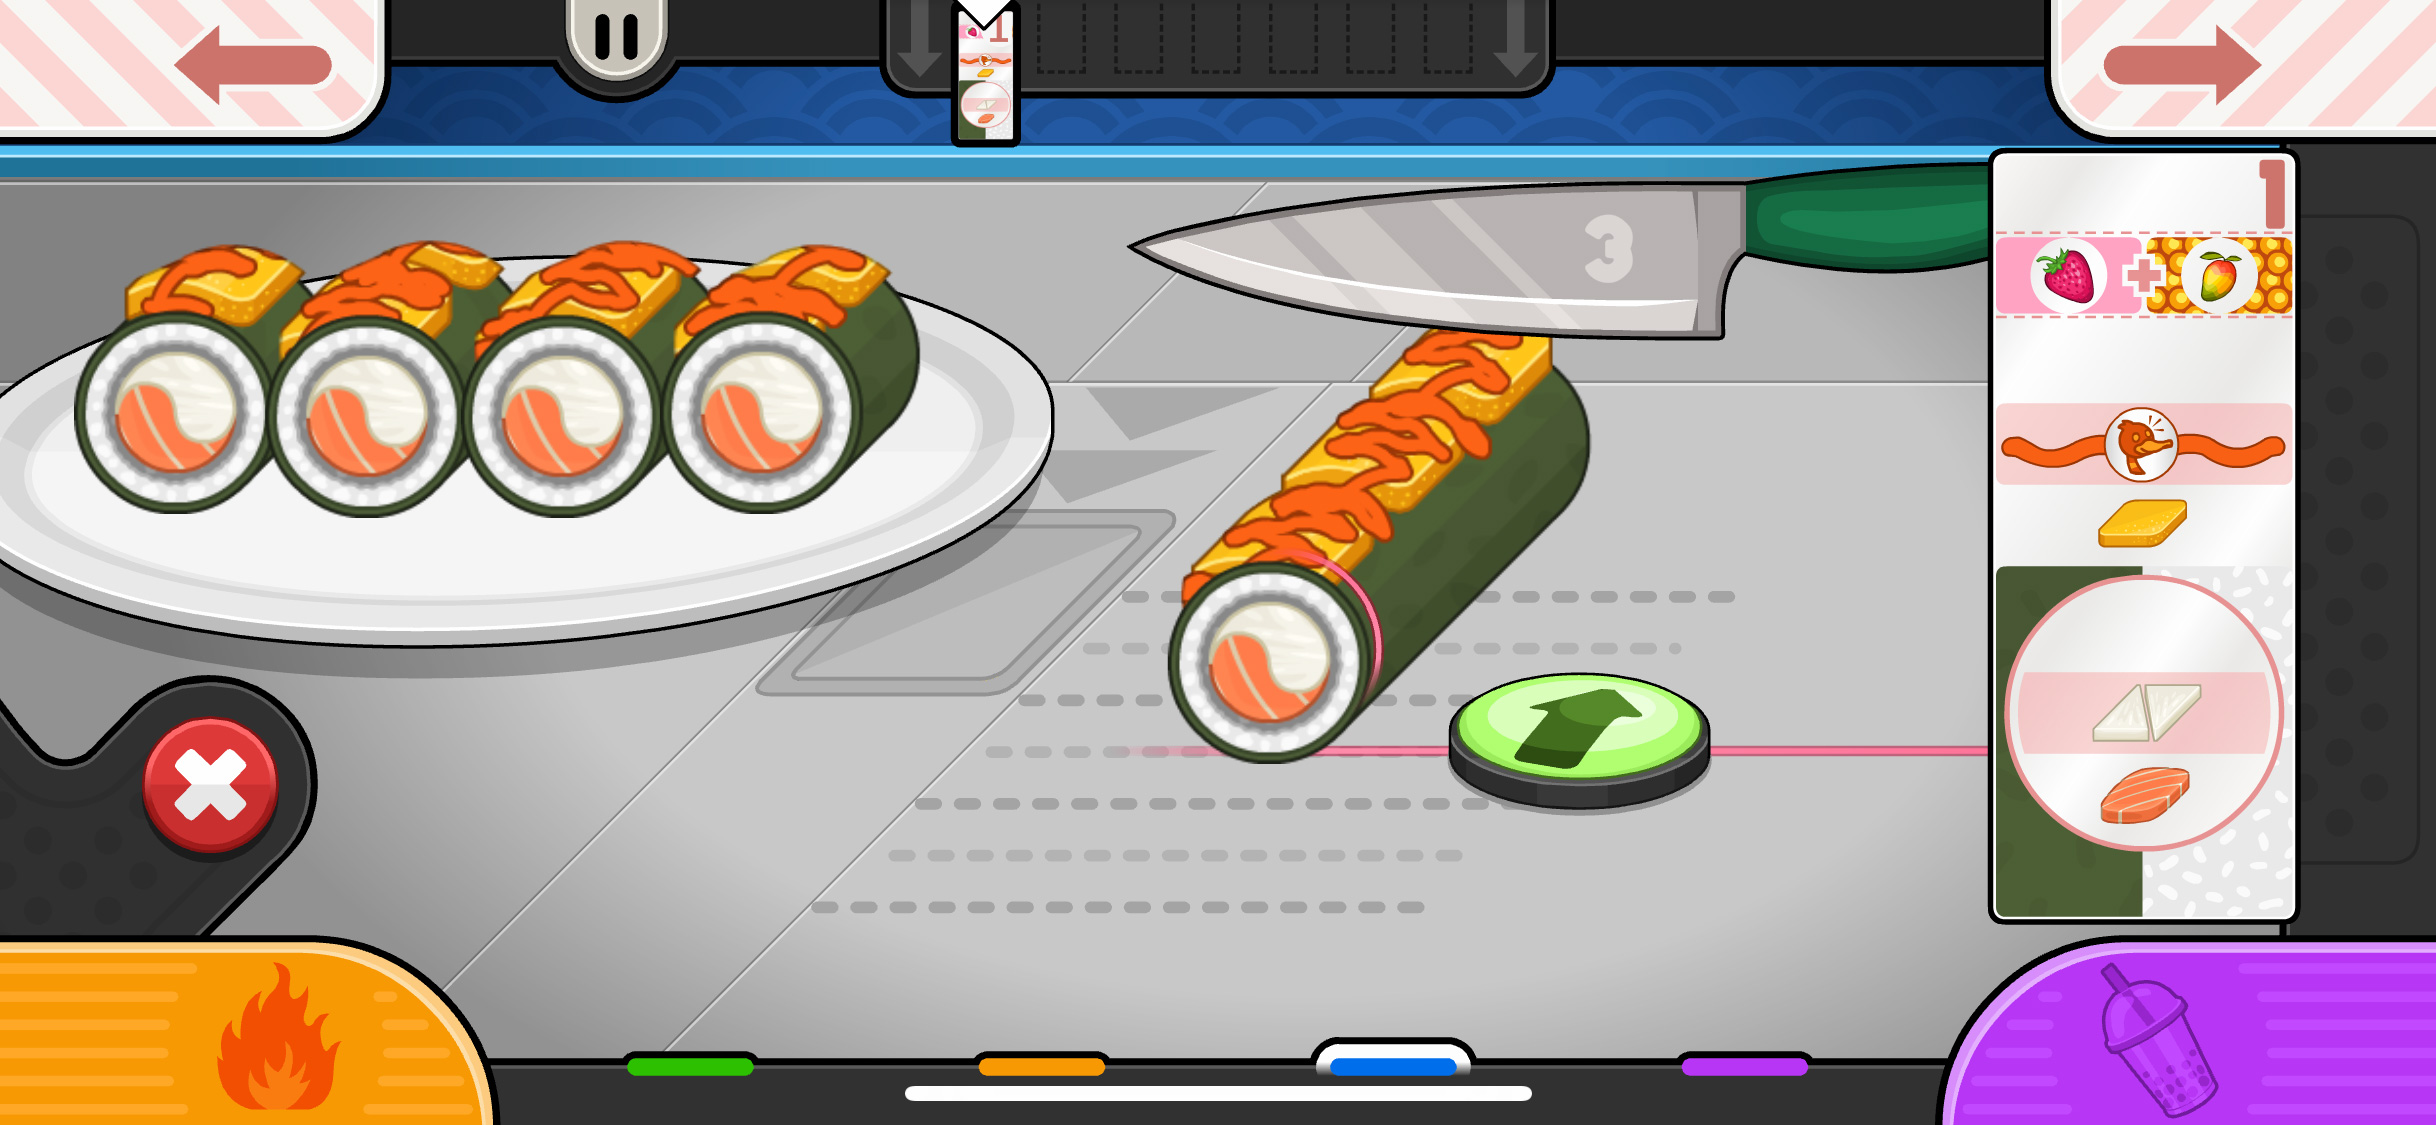 Downloaded Sushiria and expected Cupcakeria to be as good as Sushiria :  r/flipline